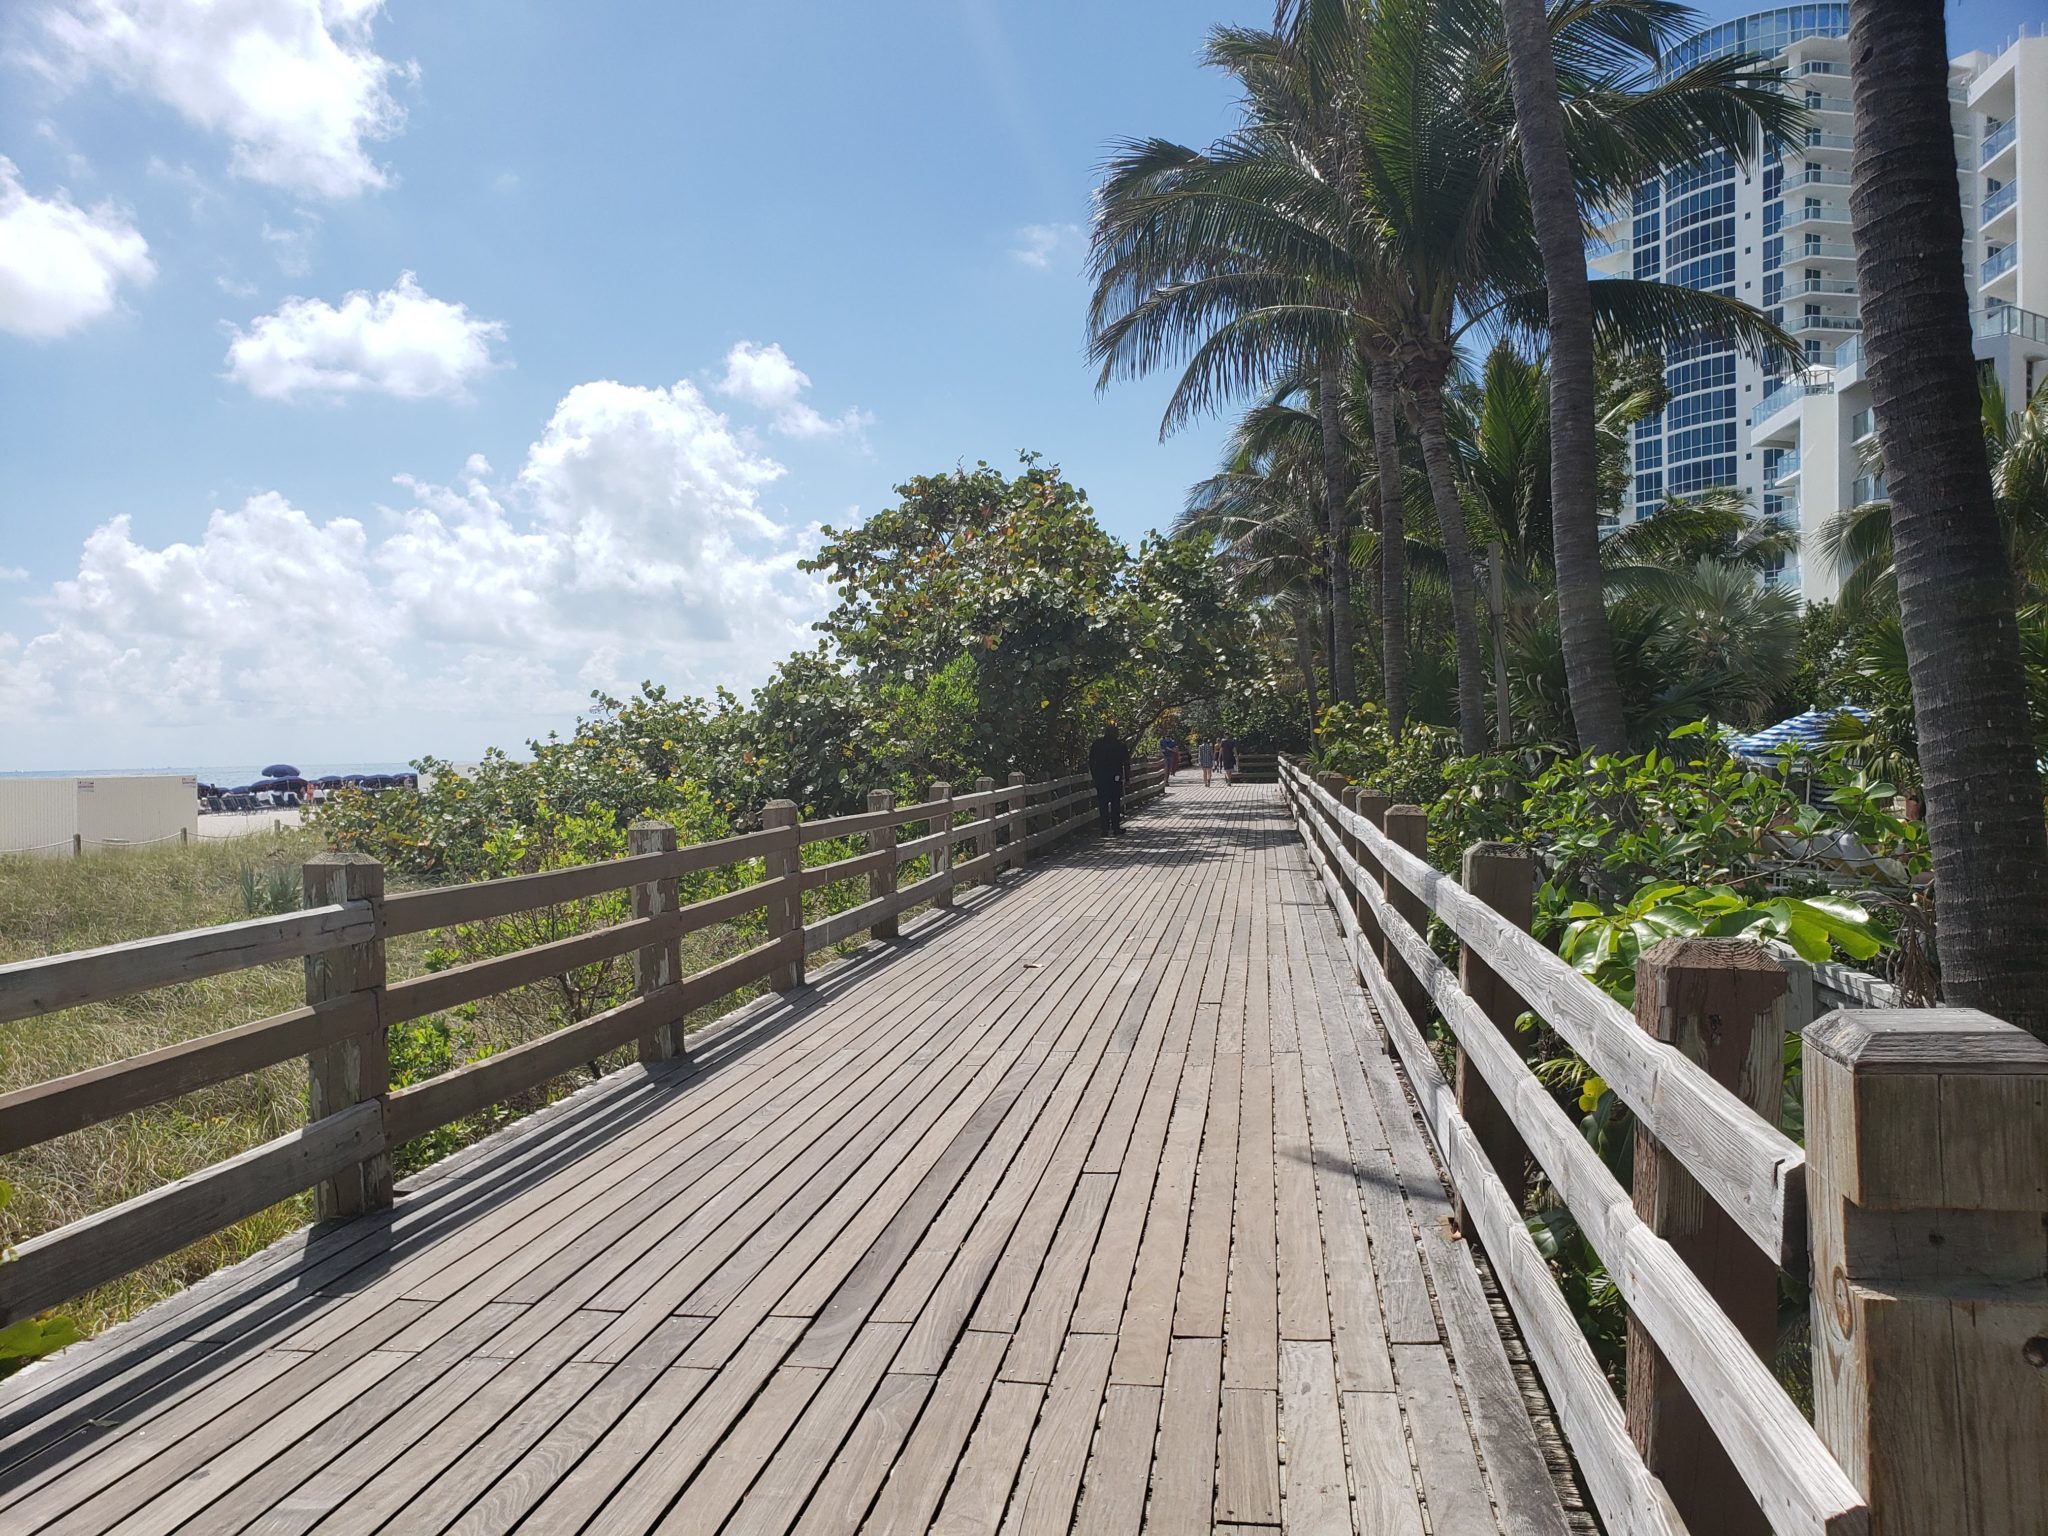 a wooden walkway with palm trees and buildings